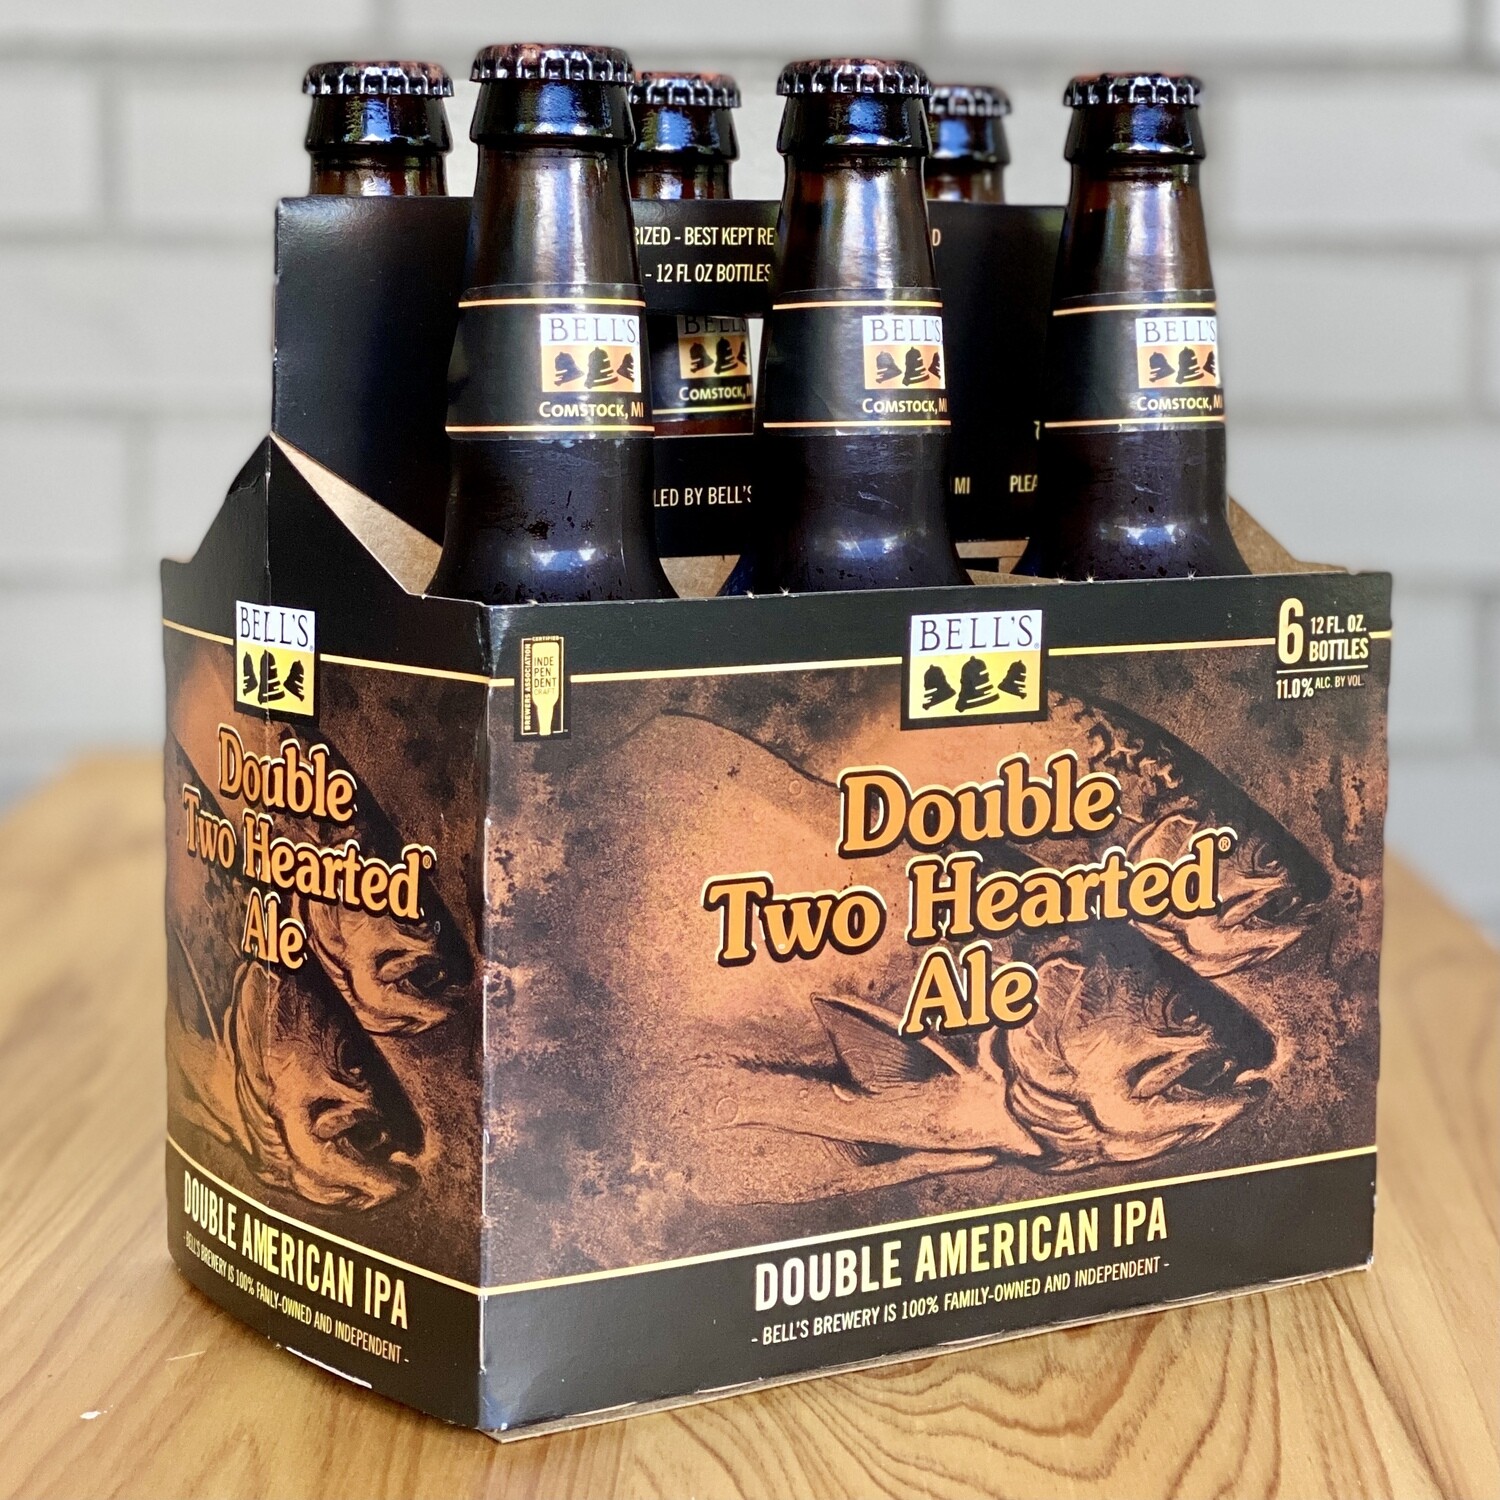 Bell's Double Two Hearted Ale (6pk)